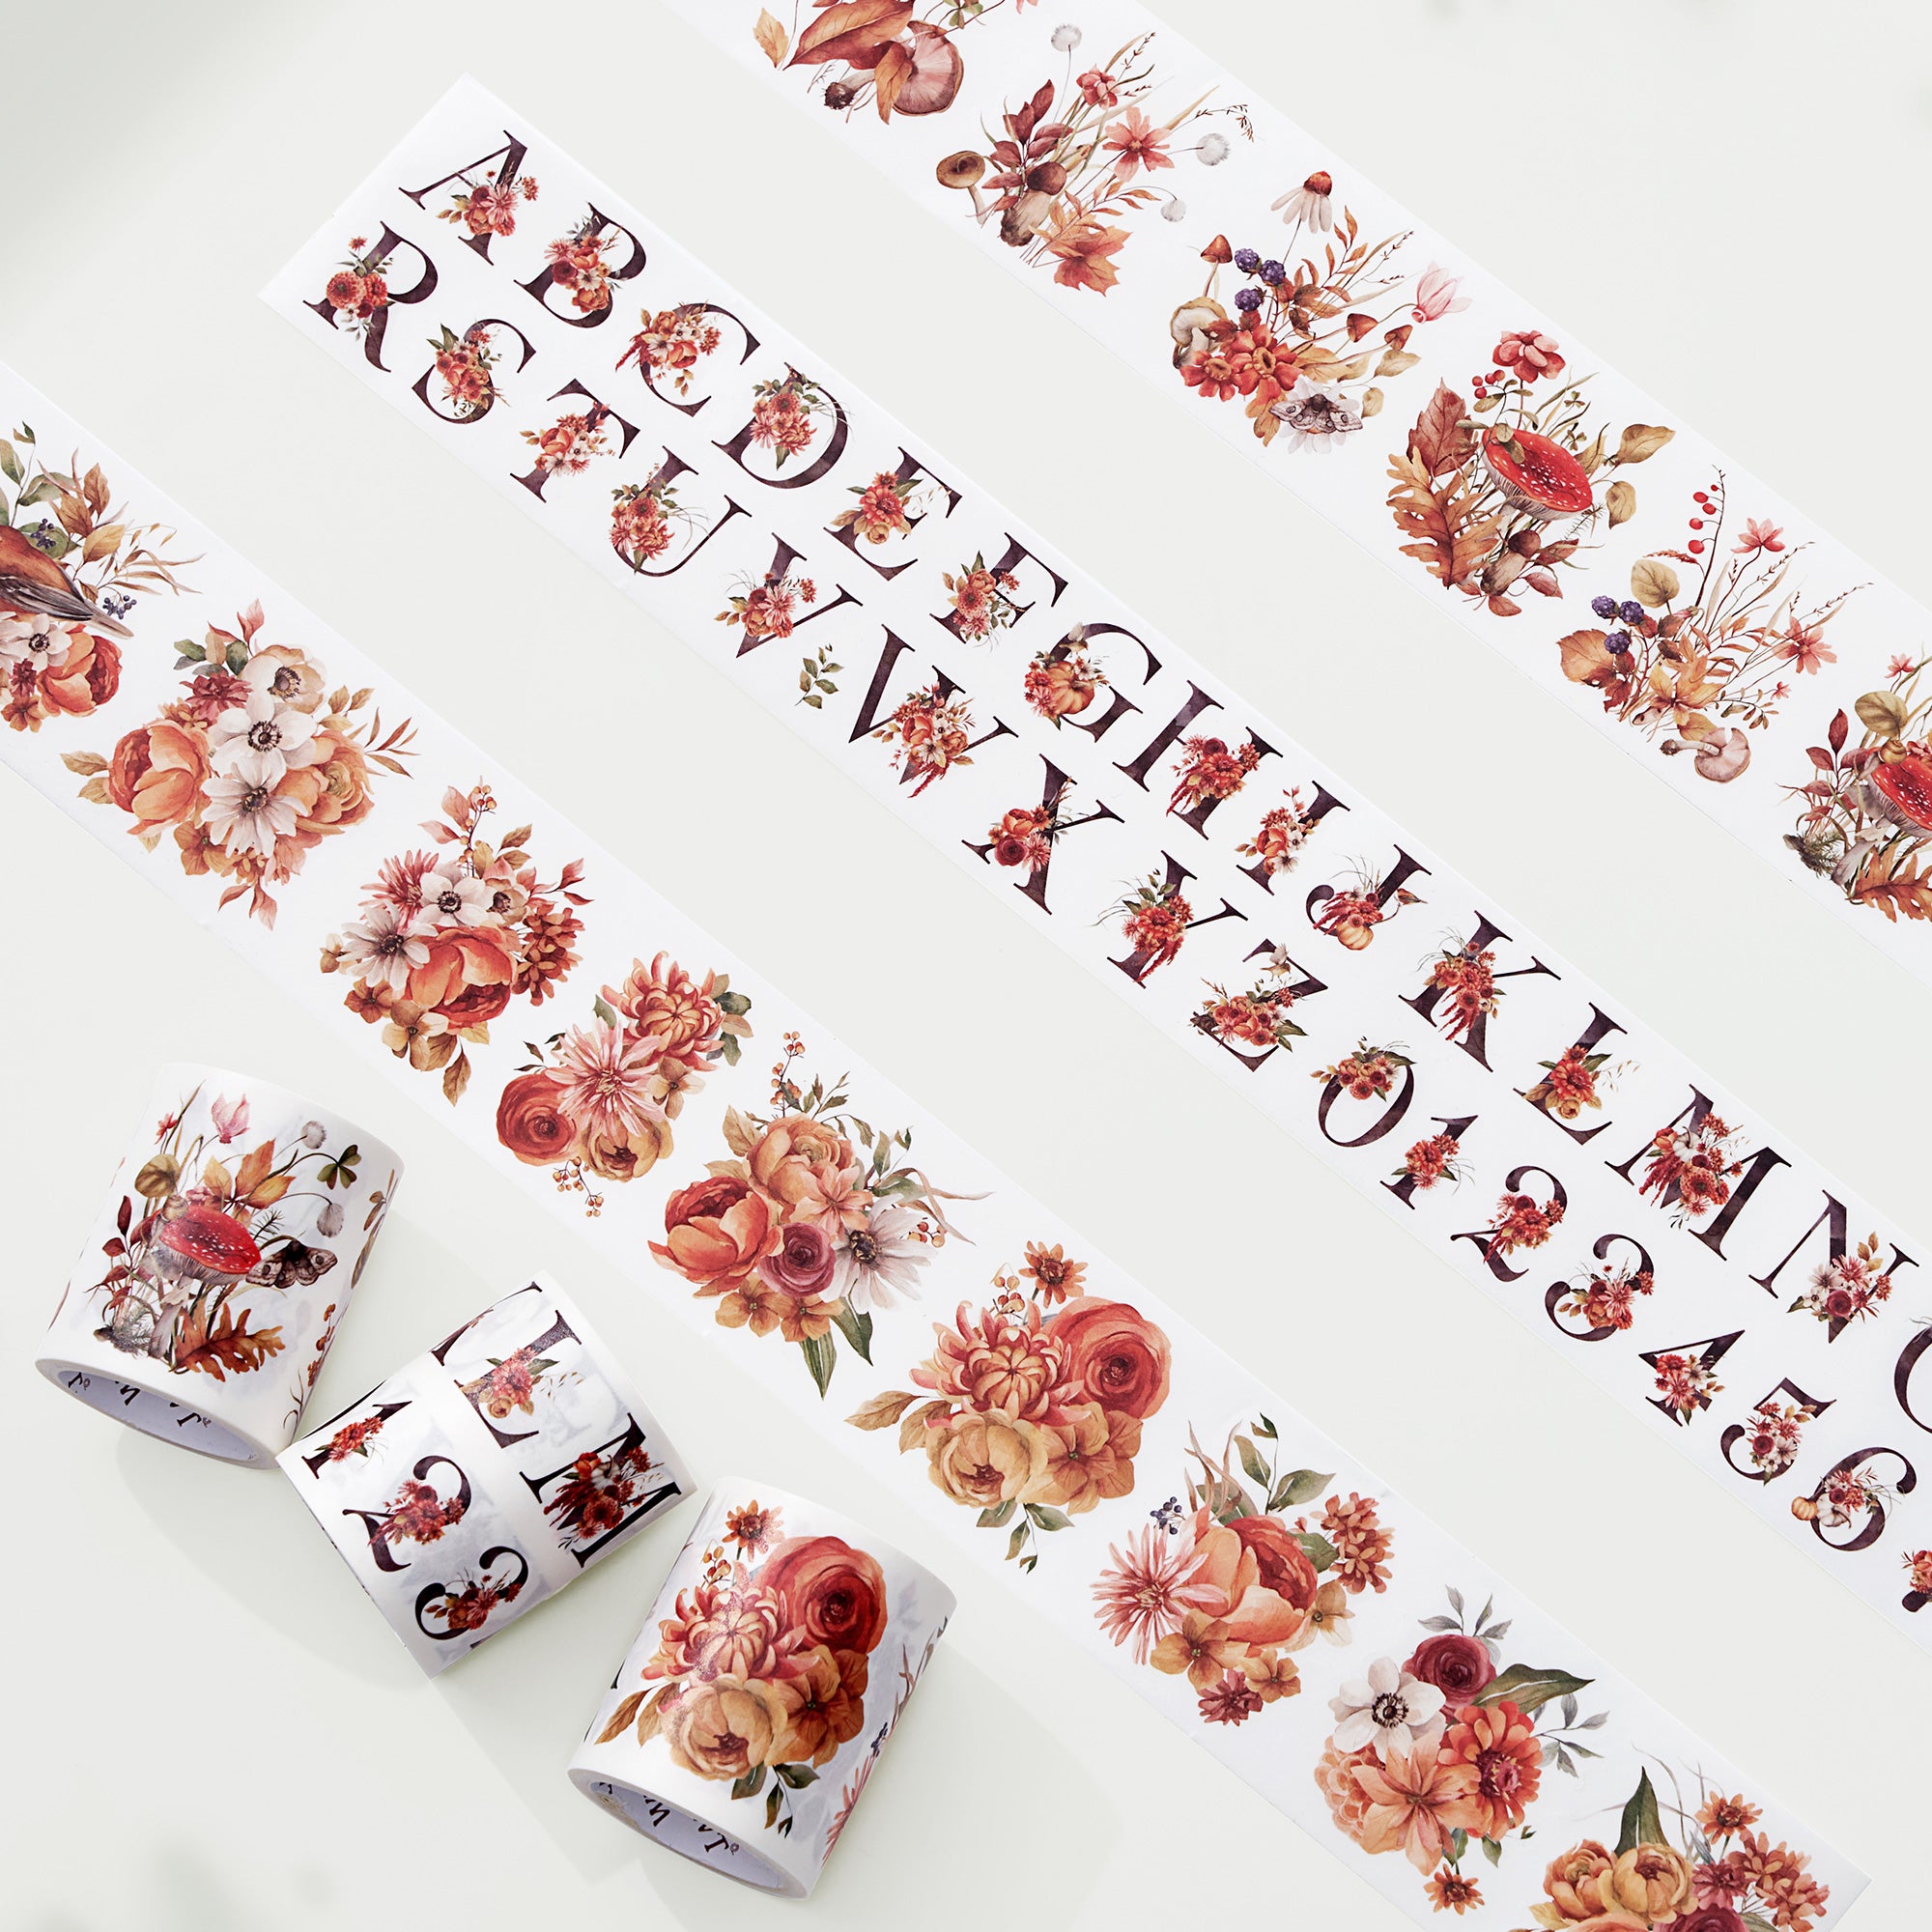 Rustic Botanical Washi Tape Sticker Set | The Washi Tape Shop. Beautiful Washi and Decorative Tape For Bullet Journals, Gift Wrapping, Planner Decoration and DIY Projects